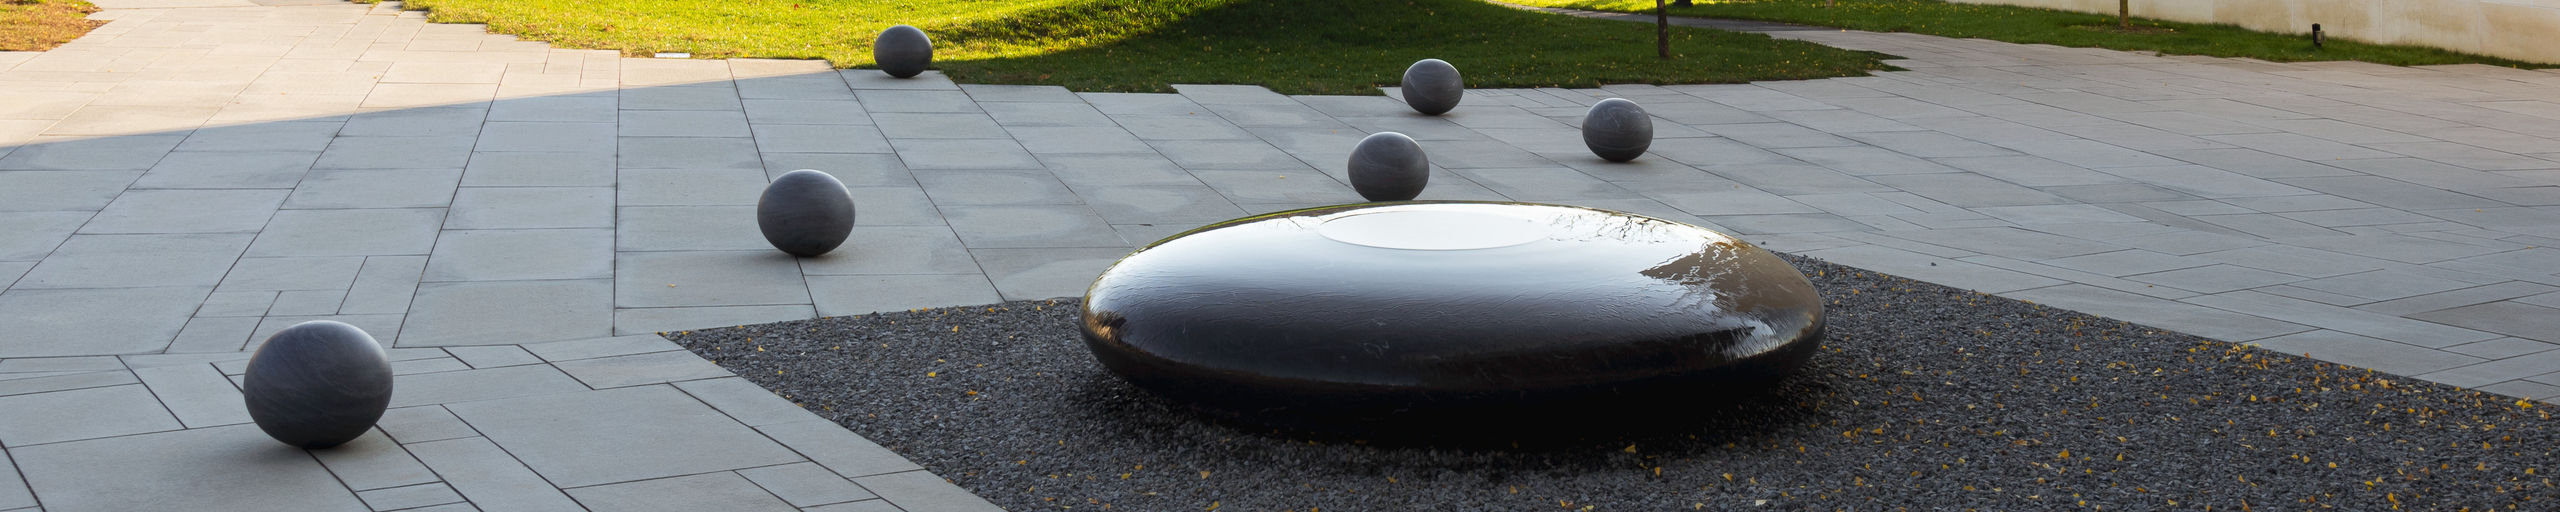 Einstein's Table, a jet mist granite work of art by Maya Lin, on the campus of Princeton University.